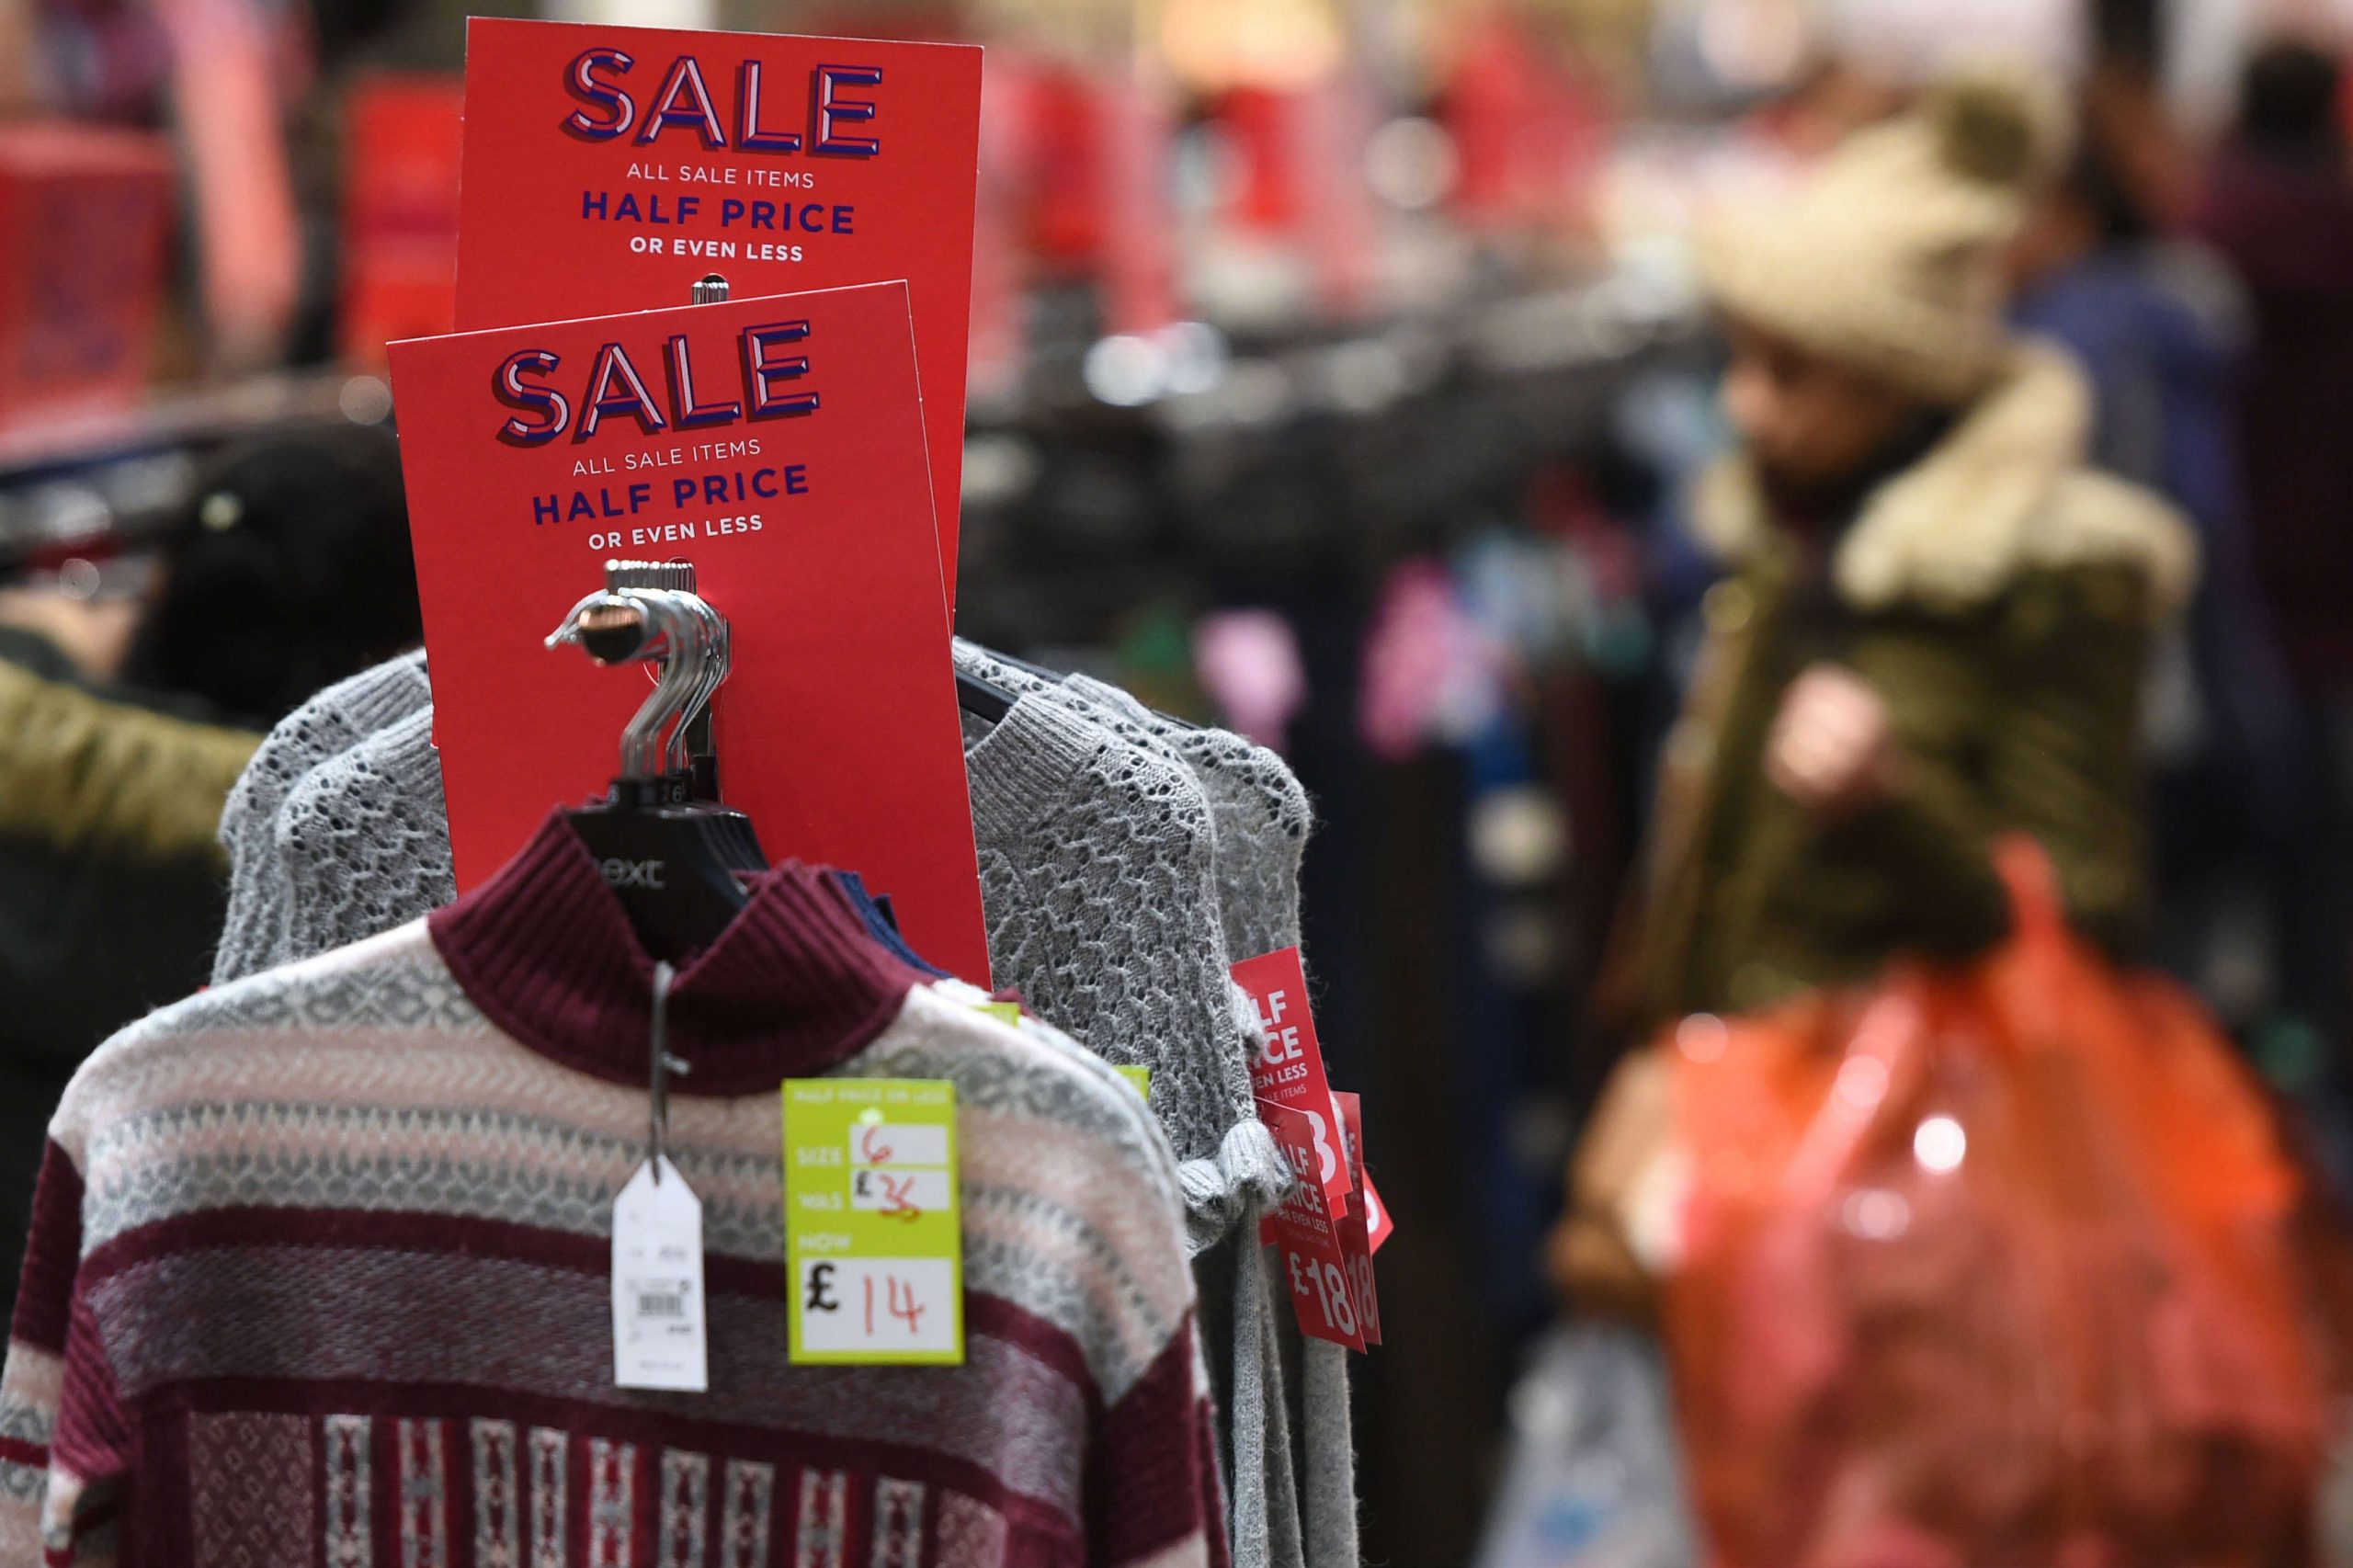 Shop prices slide amid post-Christmas sales & lockdowns